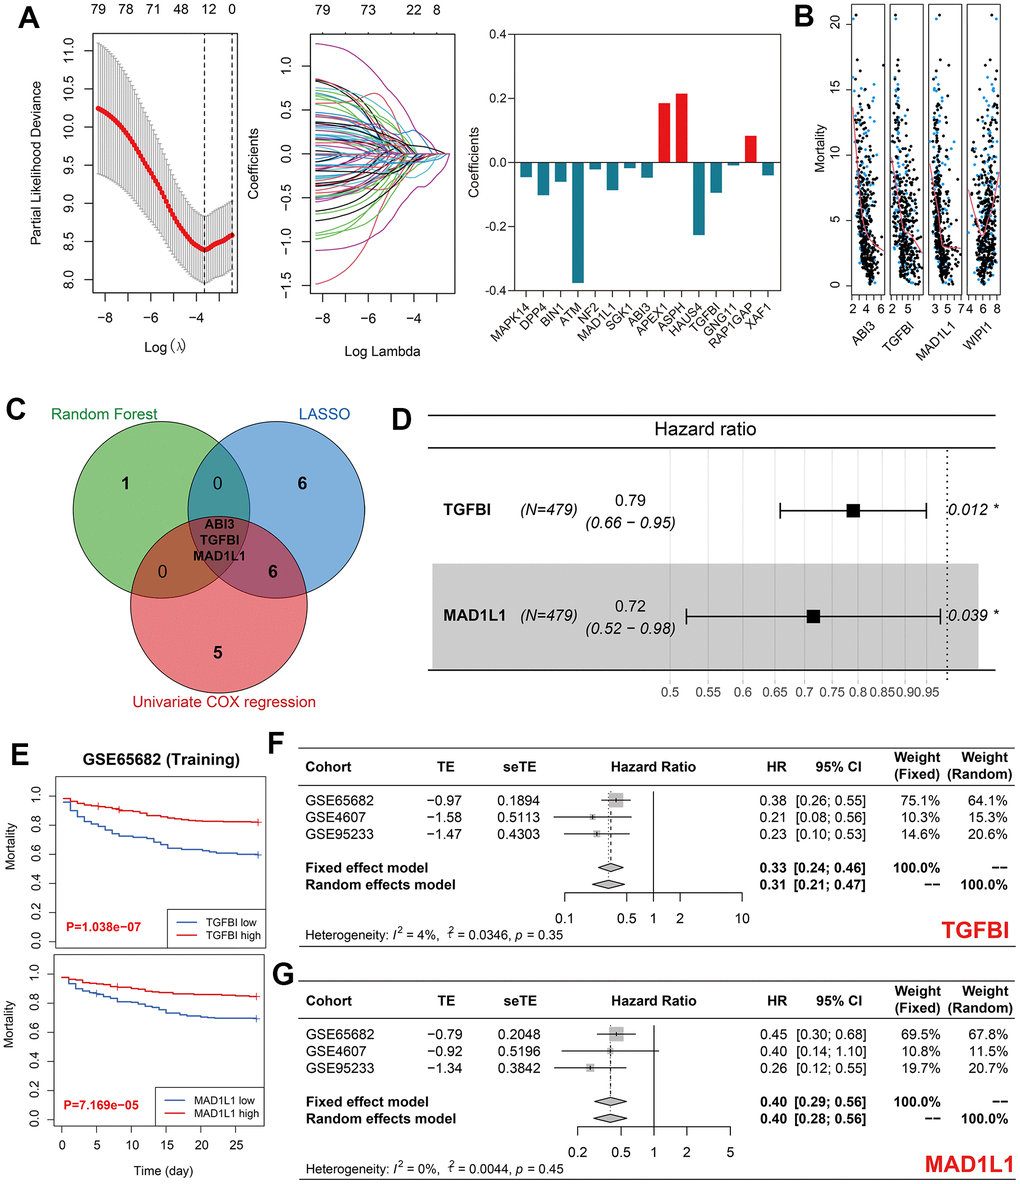 Identification of TGFBI and MAD1L1 as significant predictors of sepsis mortality. (A) LASSO regression identified 15 out of 80 genes as significant predictors of sepsis mortality. (B) Random forest analysis identified four genes, including ABI3, TGFBI, MAD1L1, and WIPI1, as significant predictors of sepsis mortality. (C) LASSO, random forest, and univariate Cox analyses identified ABI3, TGFBI, and MAD1L1 as co-determined predictors of sepsis mortality. (D) Multivariate Cox regression with stepwise selection ultimately included TGFBI and MAD1L1 in the predictive model for sepsis mortality. (E) High expression levels of TGFBI (up) and low expression levels of MAD1L1 (down) were associated with favorable prognoses in the training cohort. (F, G) Meta-analyses indicated the prognostic value of TGFBI (F) and MAD1L1 (G) in predicting sepsis mortality. Abbreviations: LASSO, Least Absolute Shrinkage and Selection Operator; TGFBI, transforming growth factor-beta induced protein; MAD1L1, mitotic spindle assembly checkpoint protein.